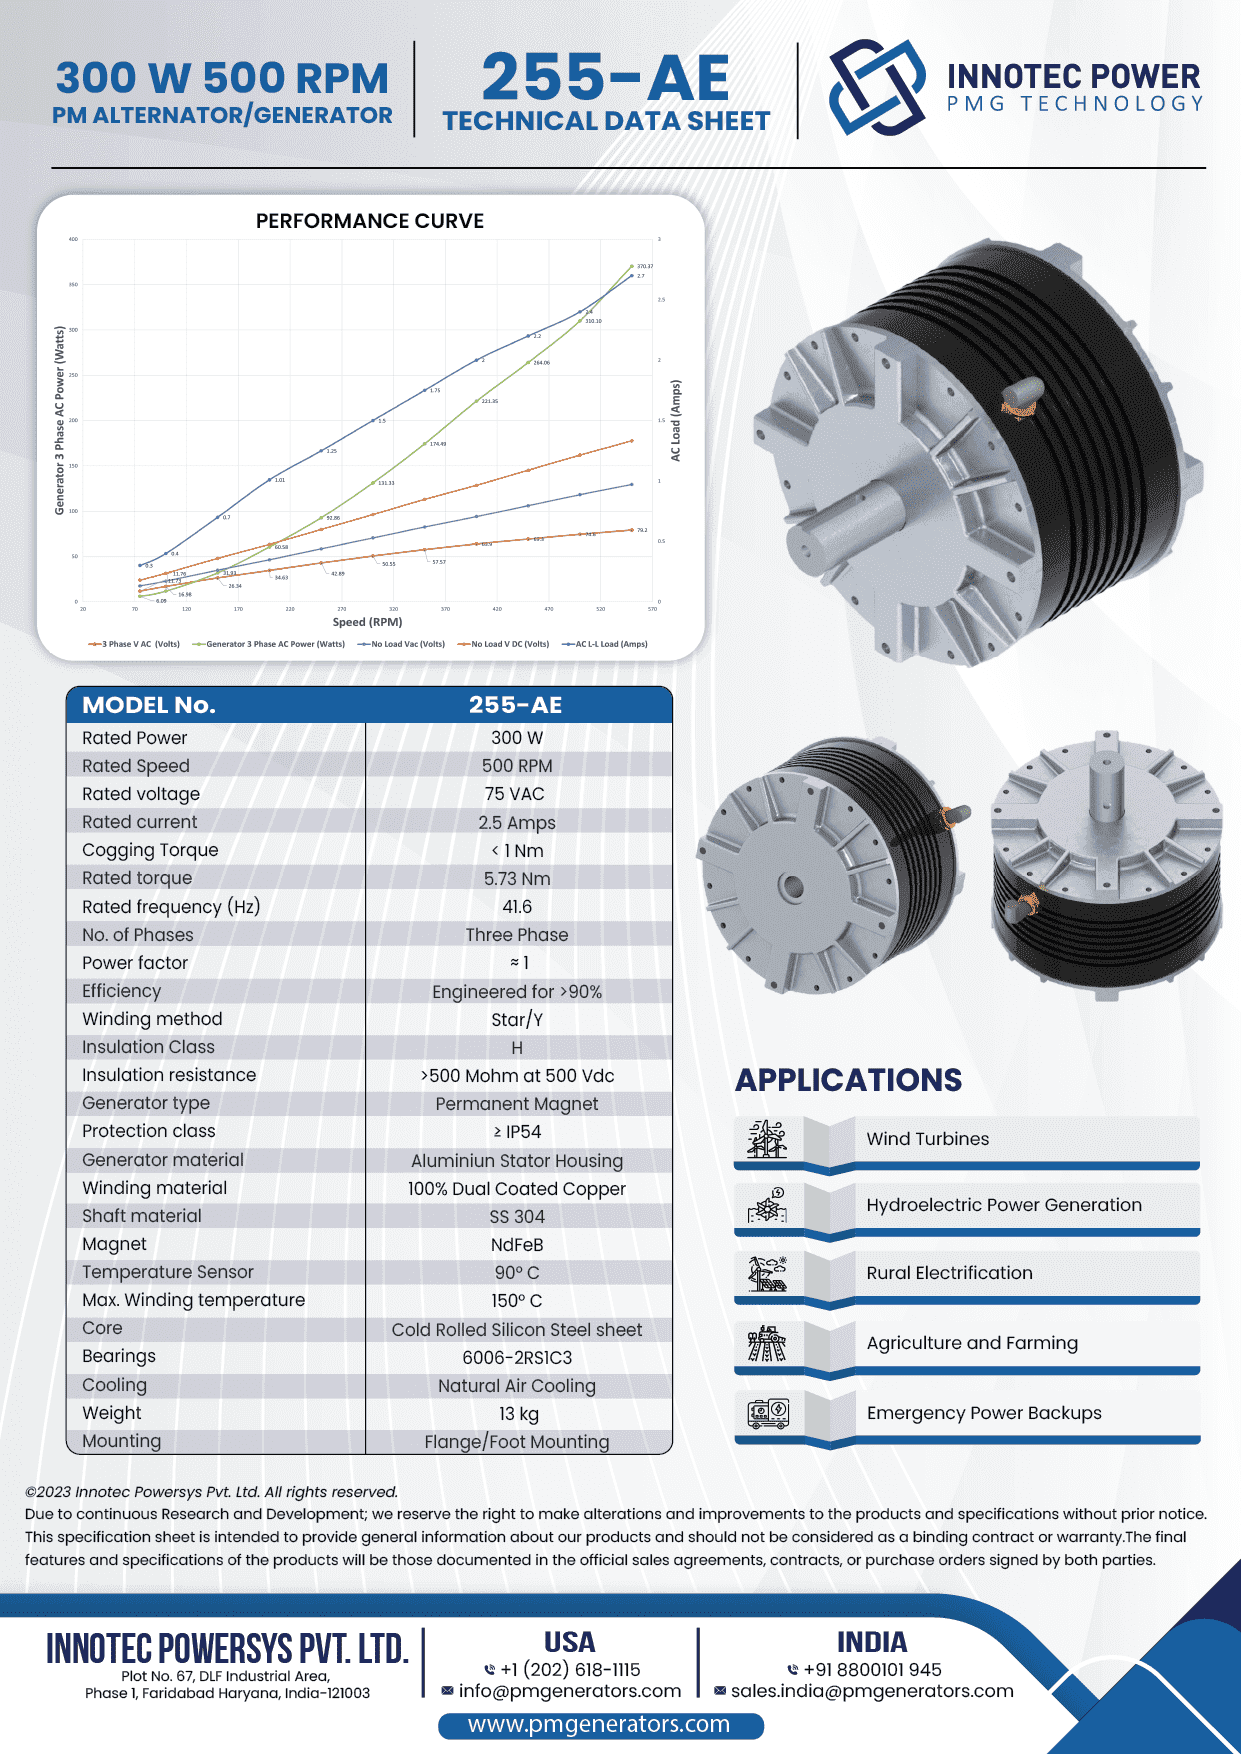 Data sheet of our 300 W Alternators for Wind Turbine applications at 500 RPM